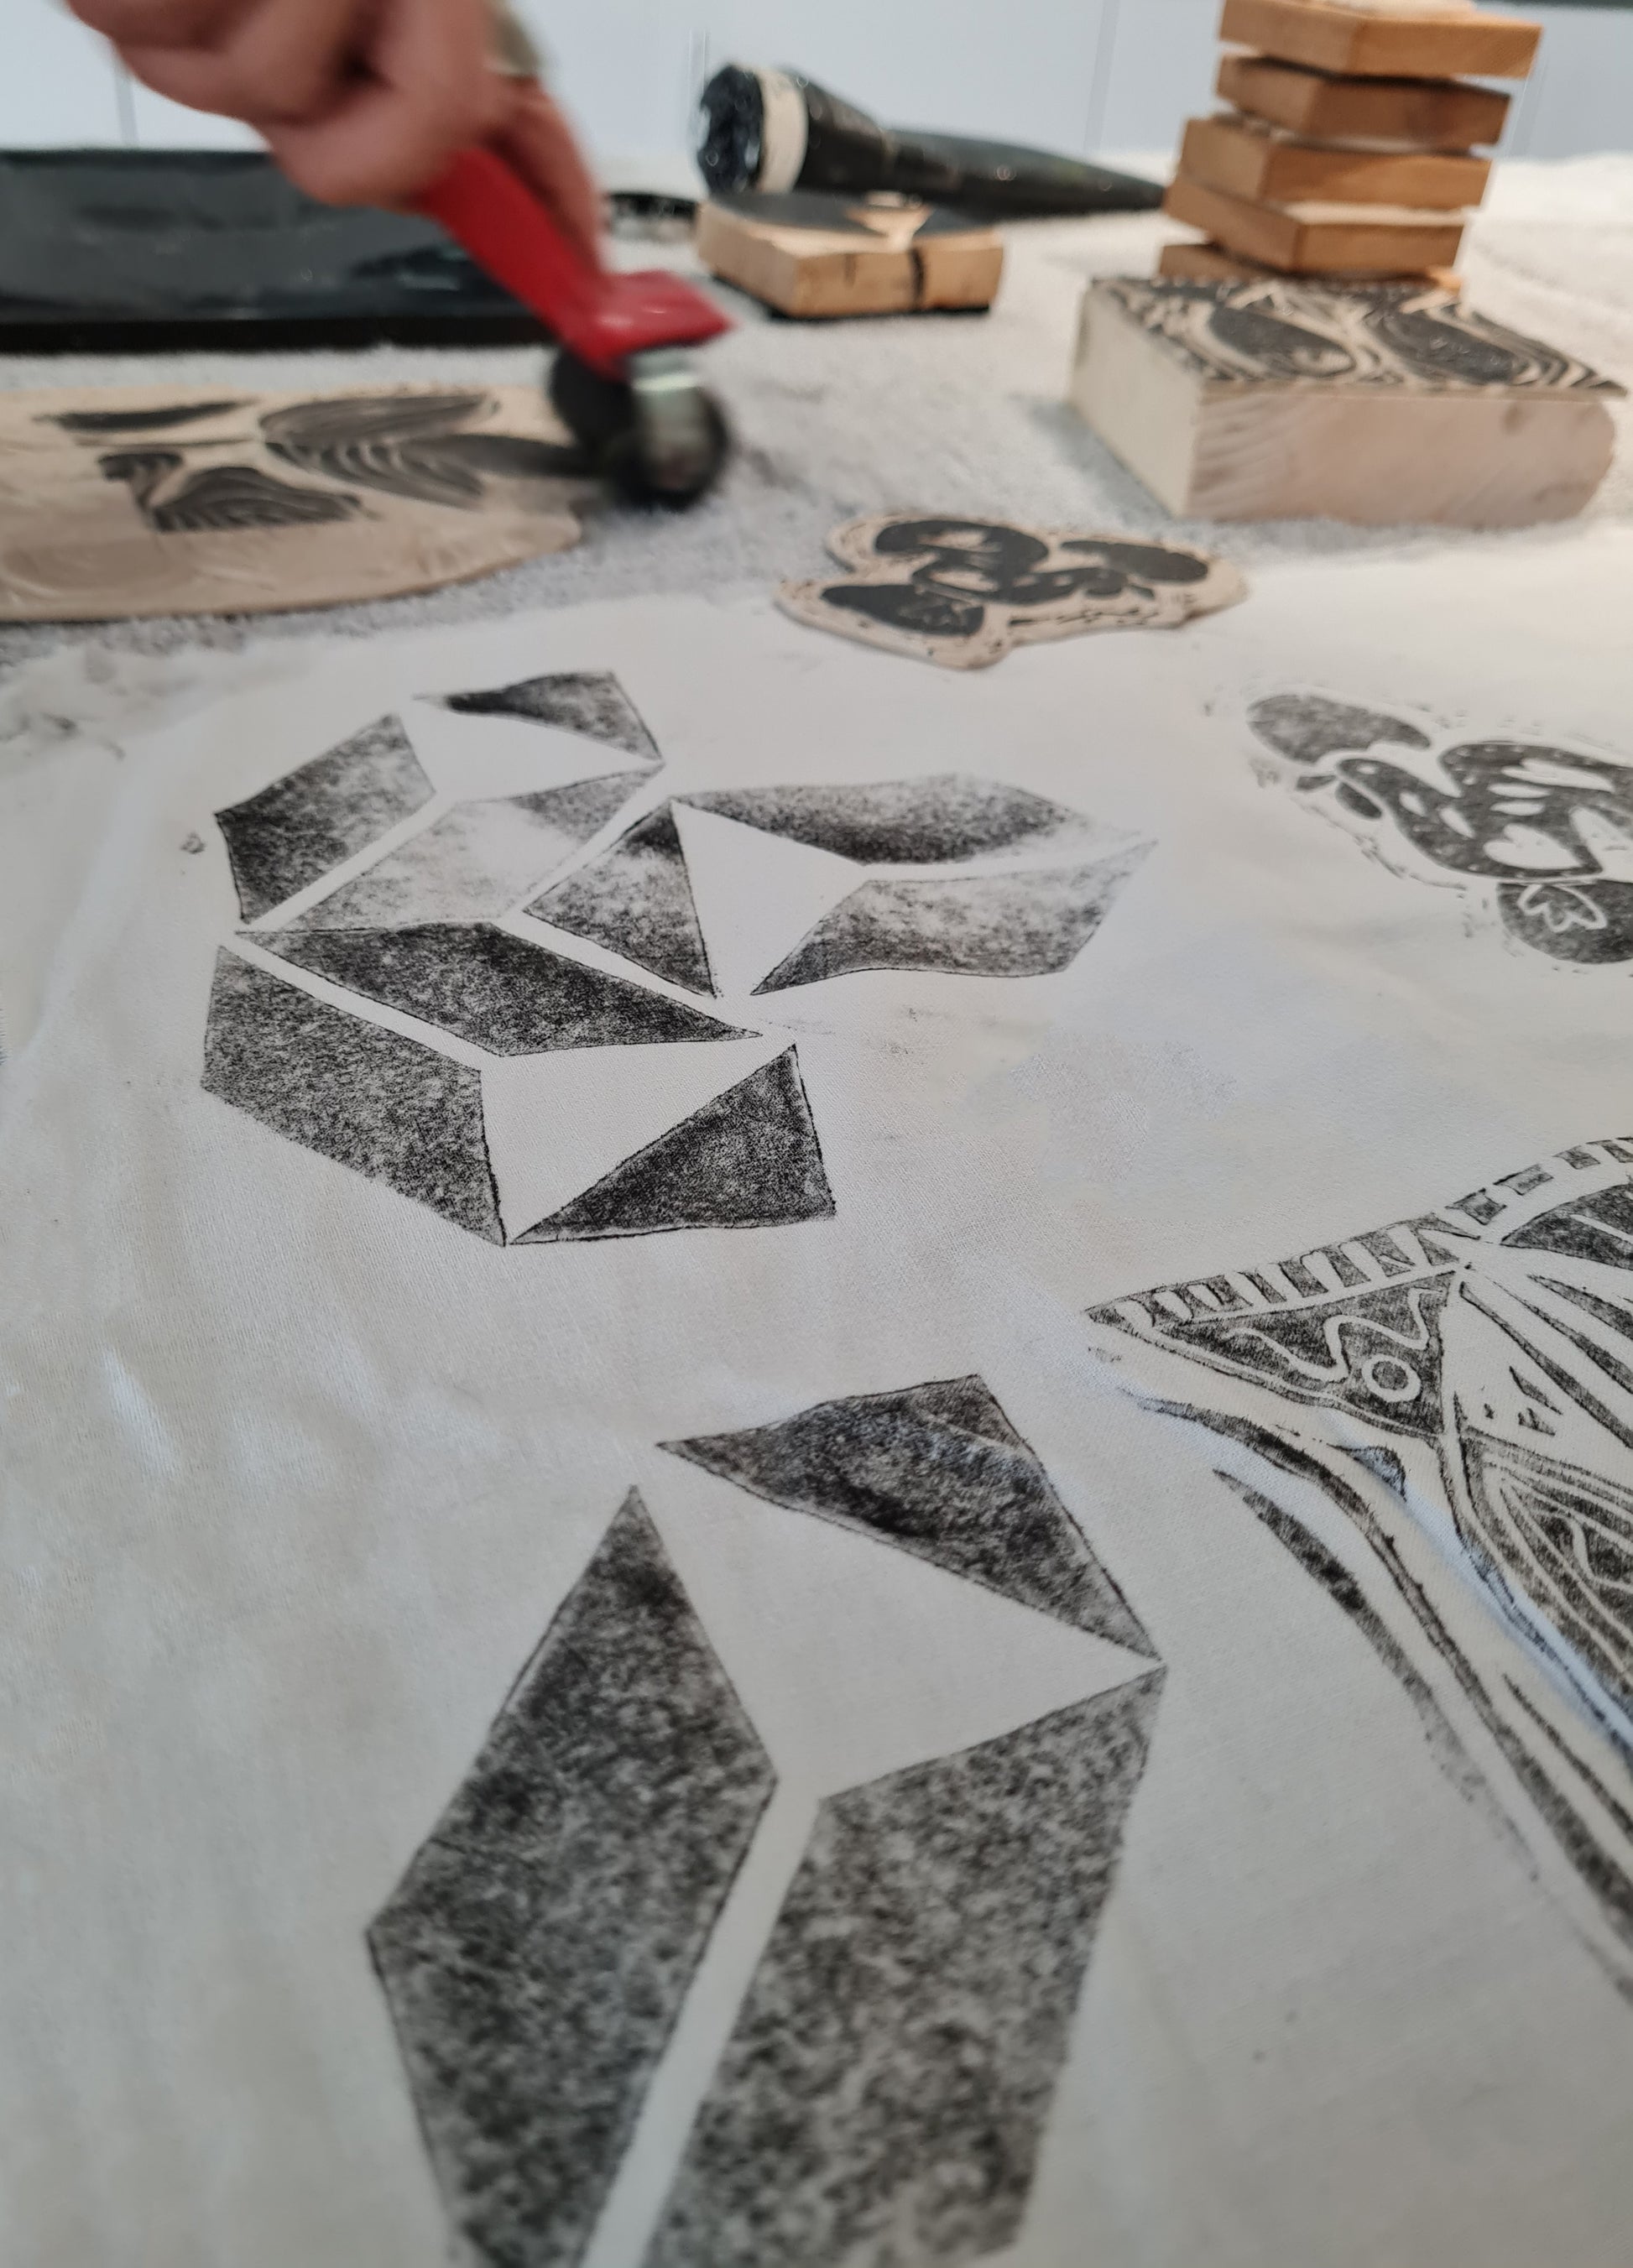 Textile Printing Workshop "Print your own Tote Bag" with Ana and Isabel in Porto, Portugal by subcultours